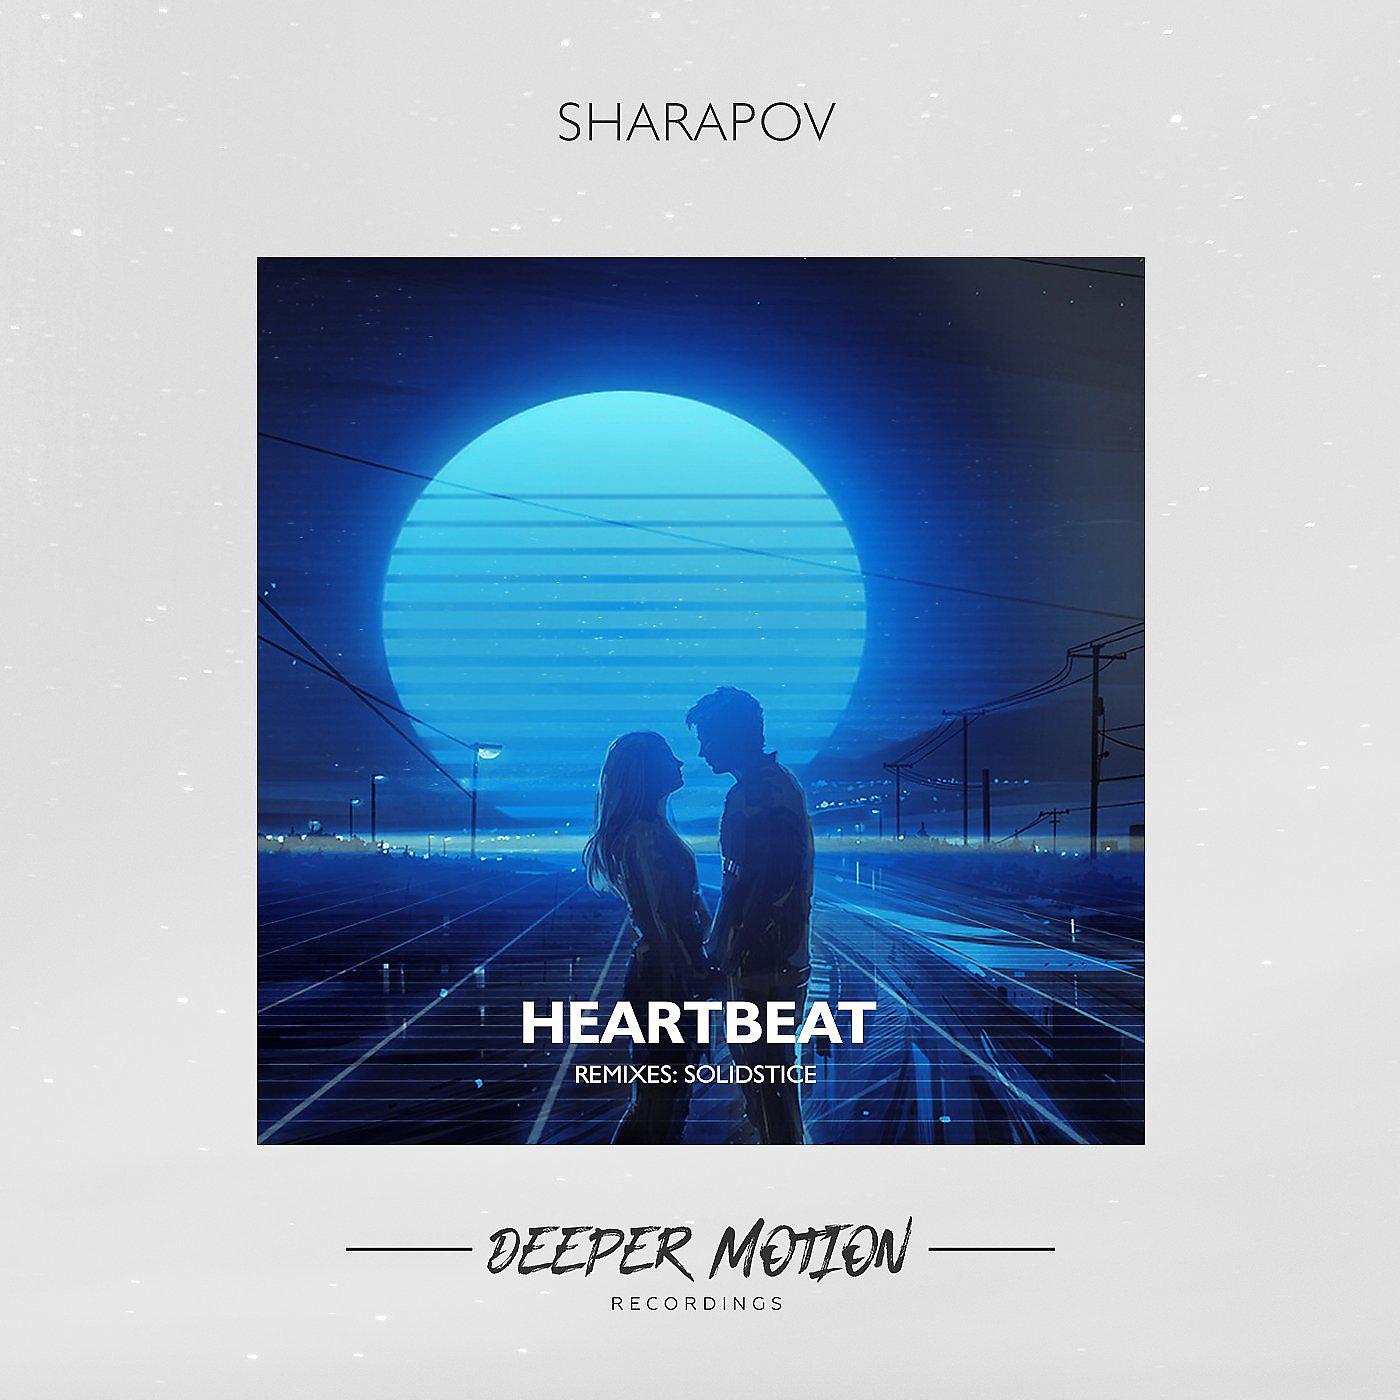 Heartbeat исполнитель диджей. In the House in a Heartbeat метро ексодус. In the Night Kevin Karlson Remix Solidstice. Deeper Motion Podcast. Deep motion